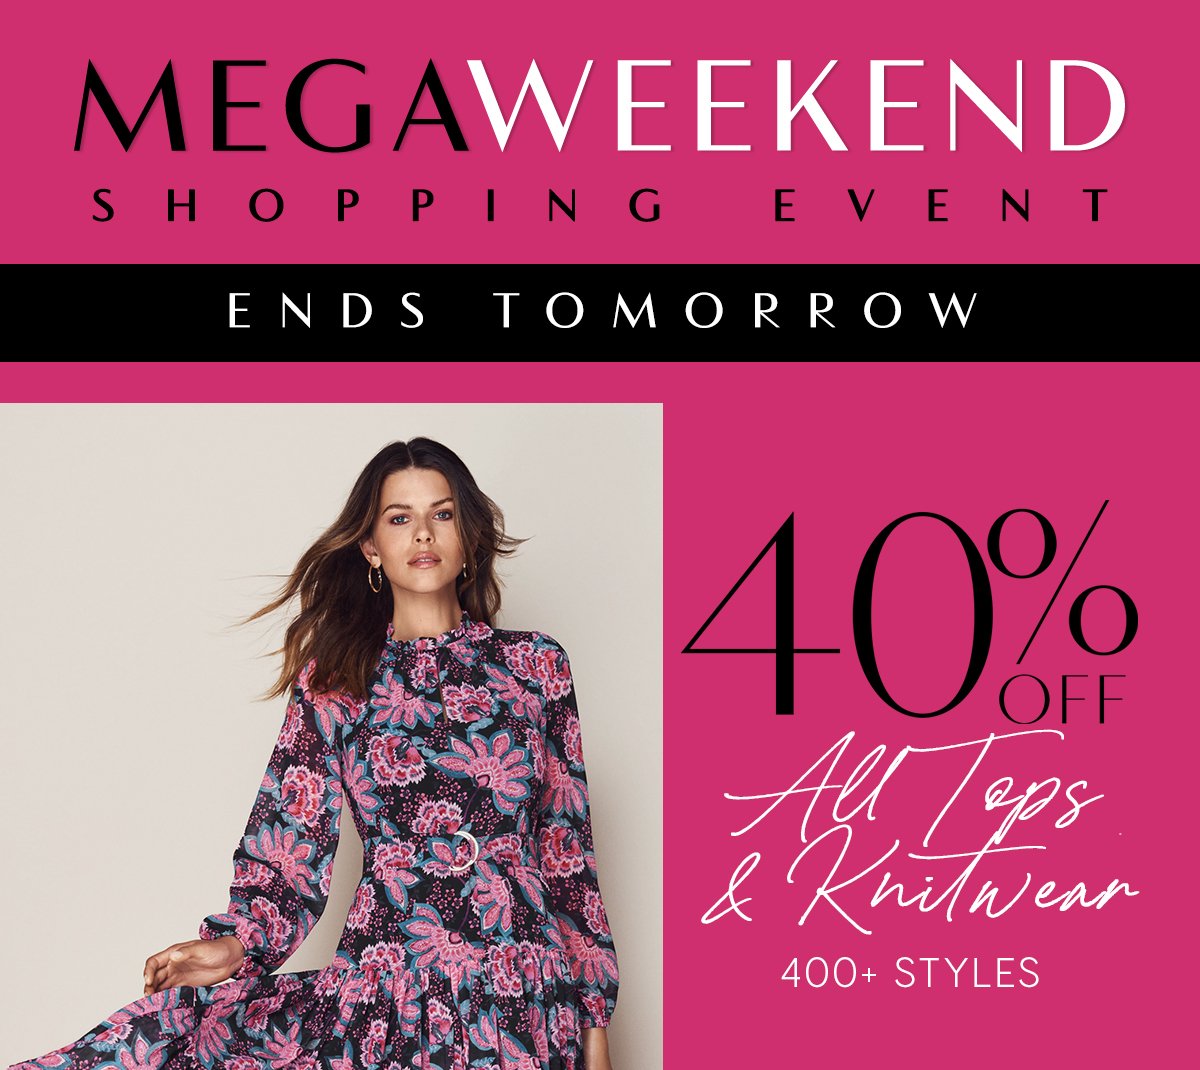 Mega Weekend Shopping Event. 40% Off All Tops & Knitwear.